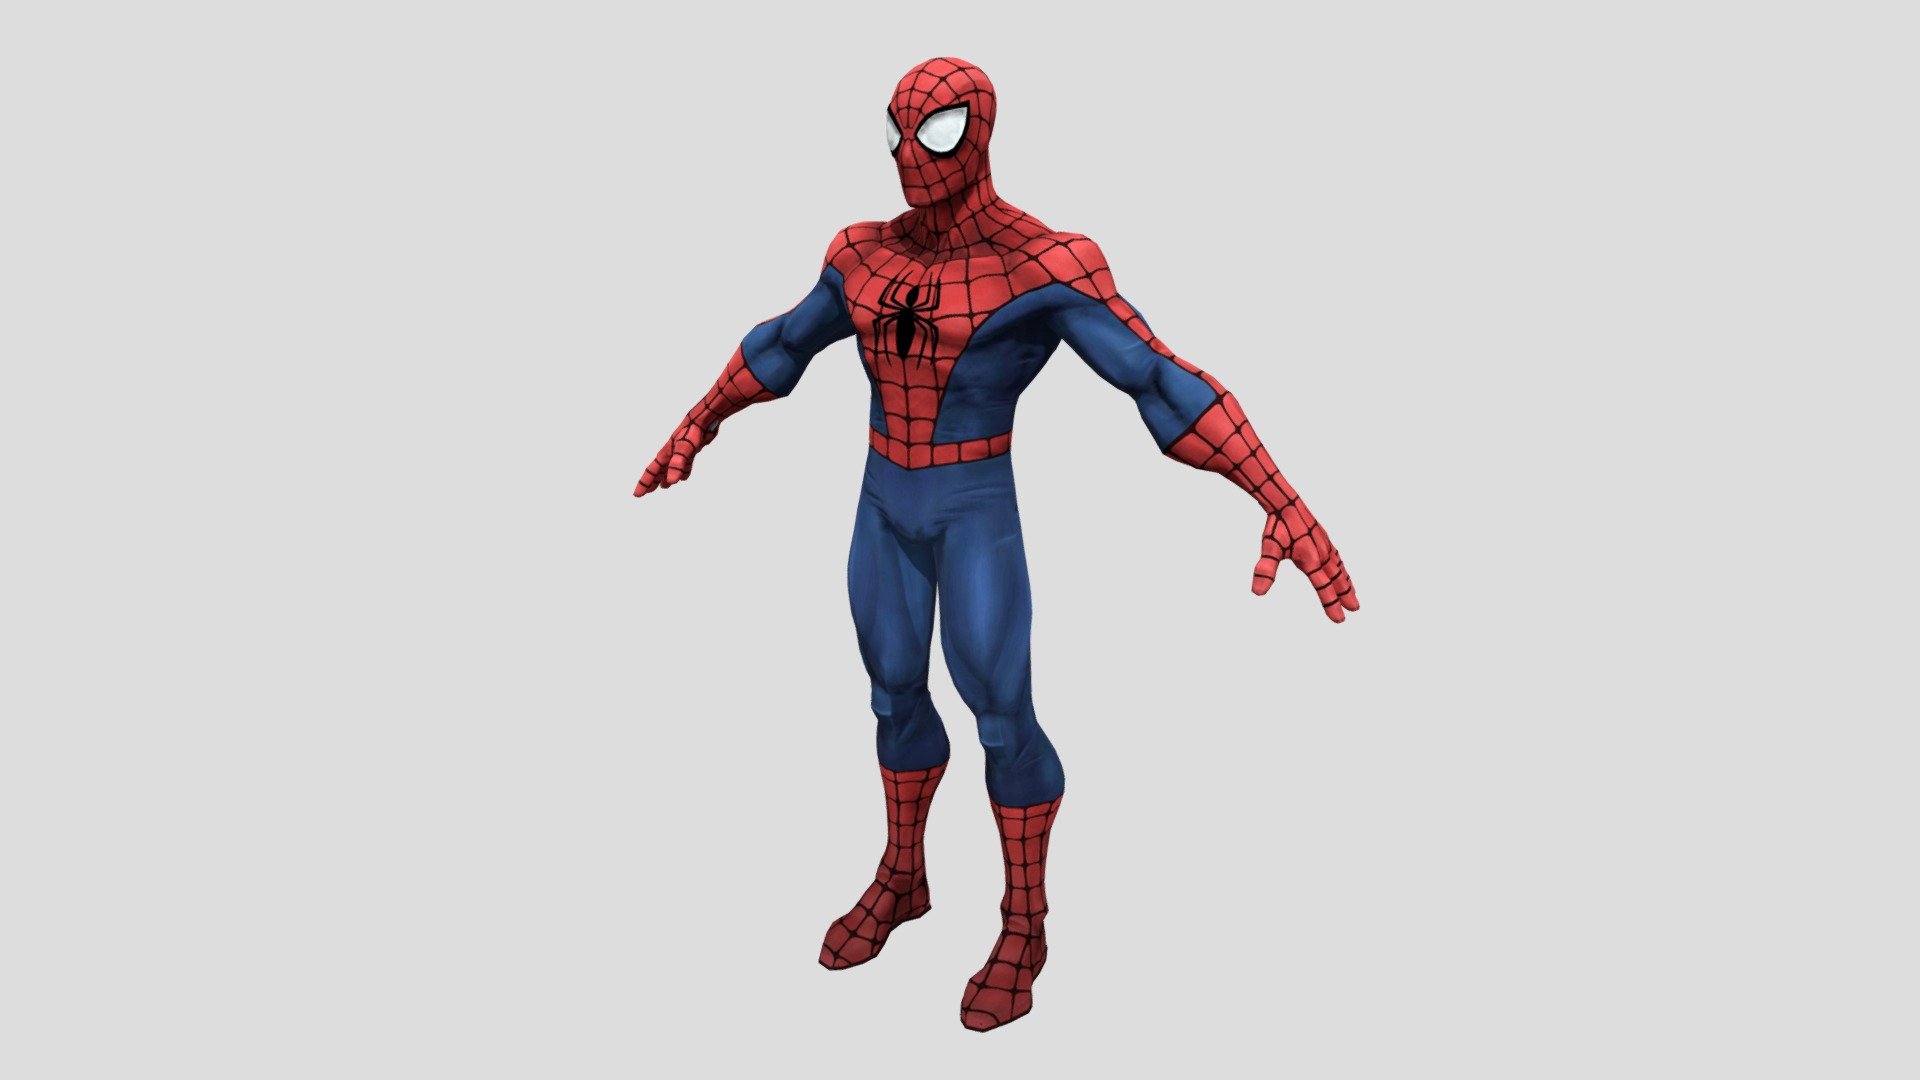 -Model was given, I rigged and paint the skin weights.-

Model is the popular superhero character Spiderman 3d model